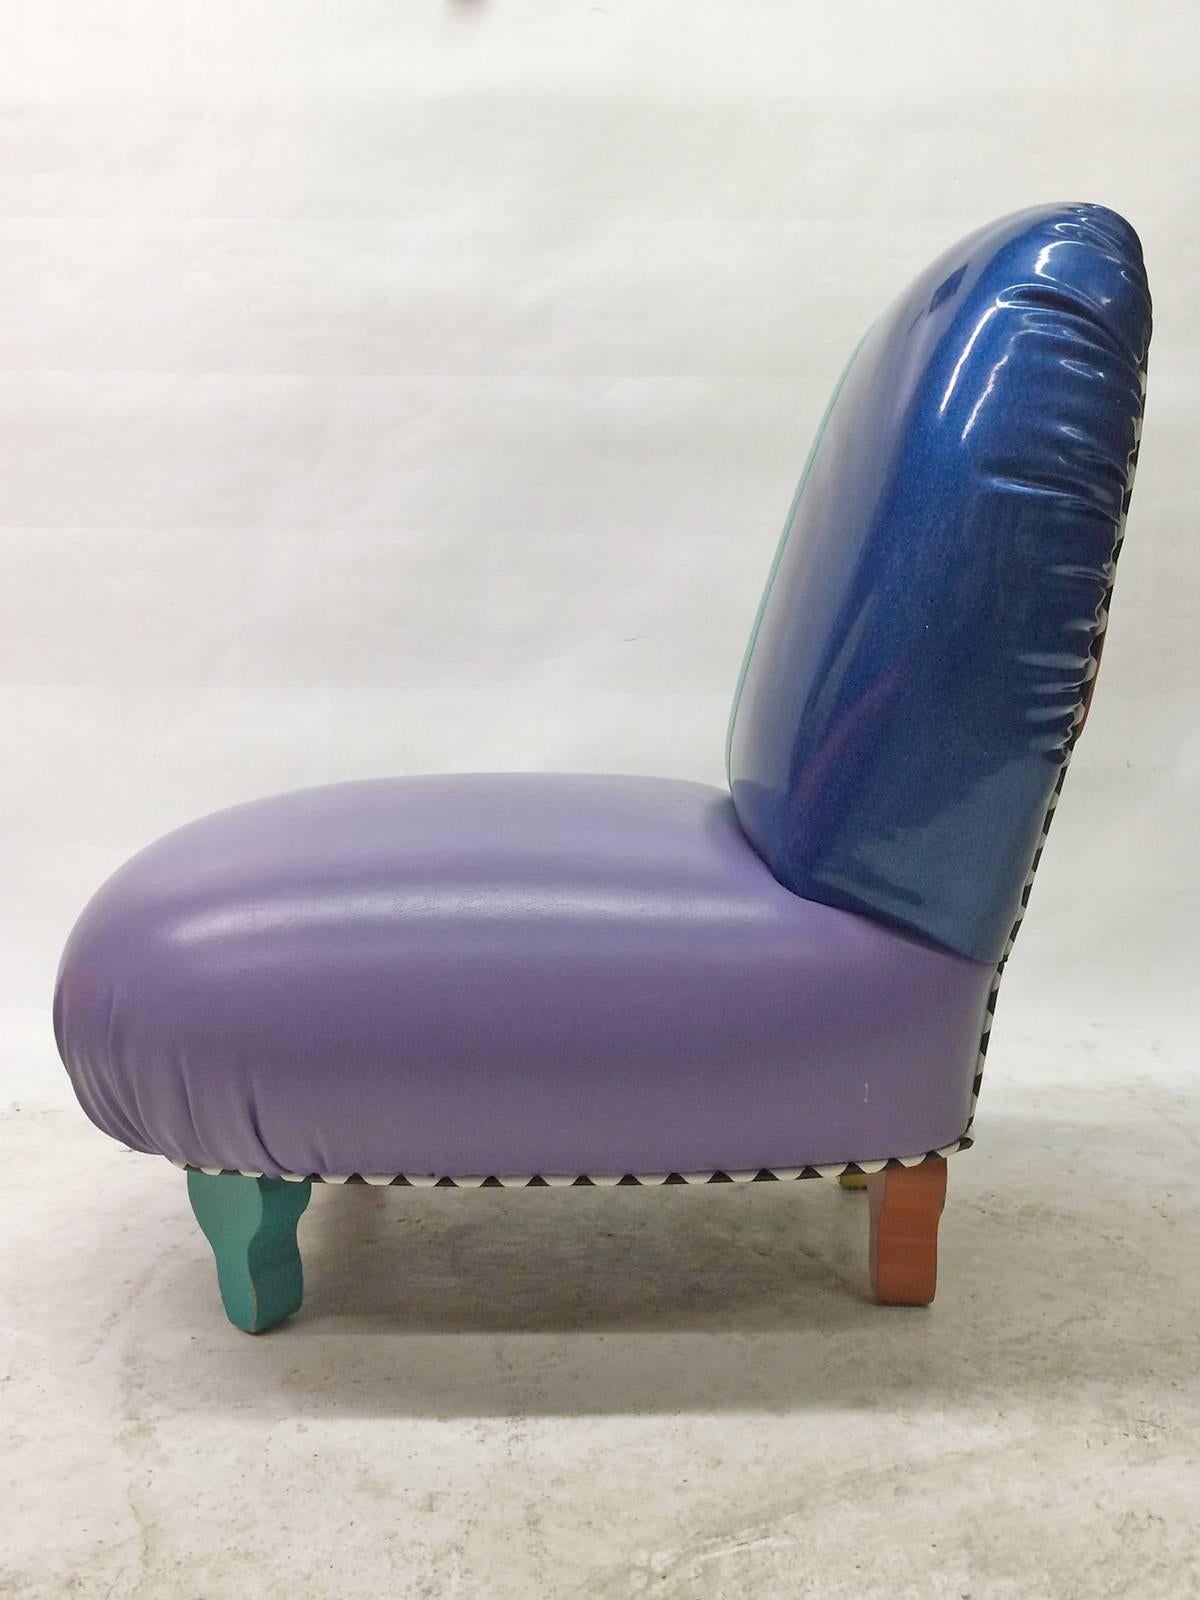 This playful Memphis inspired slipper chair by 1980s Los Angeles designer Harry Siege is finished in primary and secondary colored vinyl. Detailing is completed with black and white pyramid piping and legs in green, red, orange and yellow. The blue